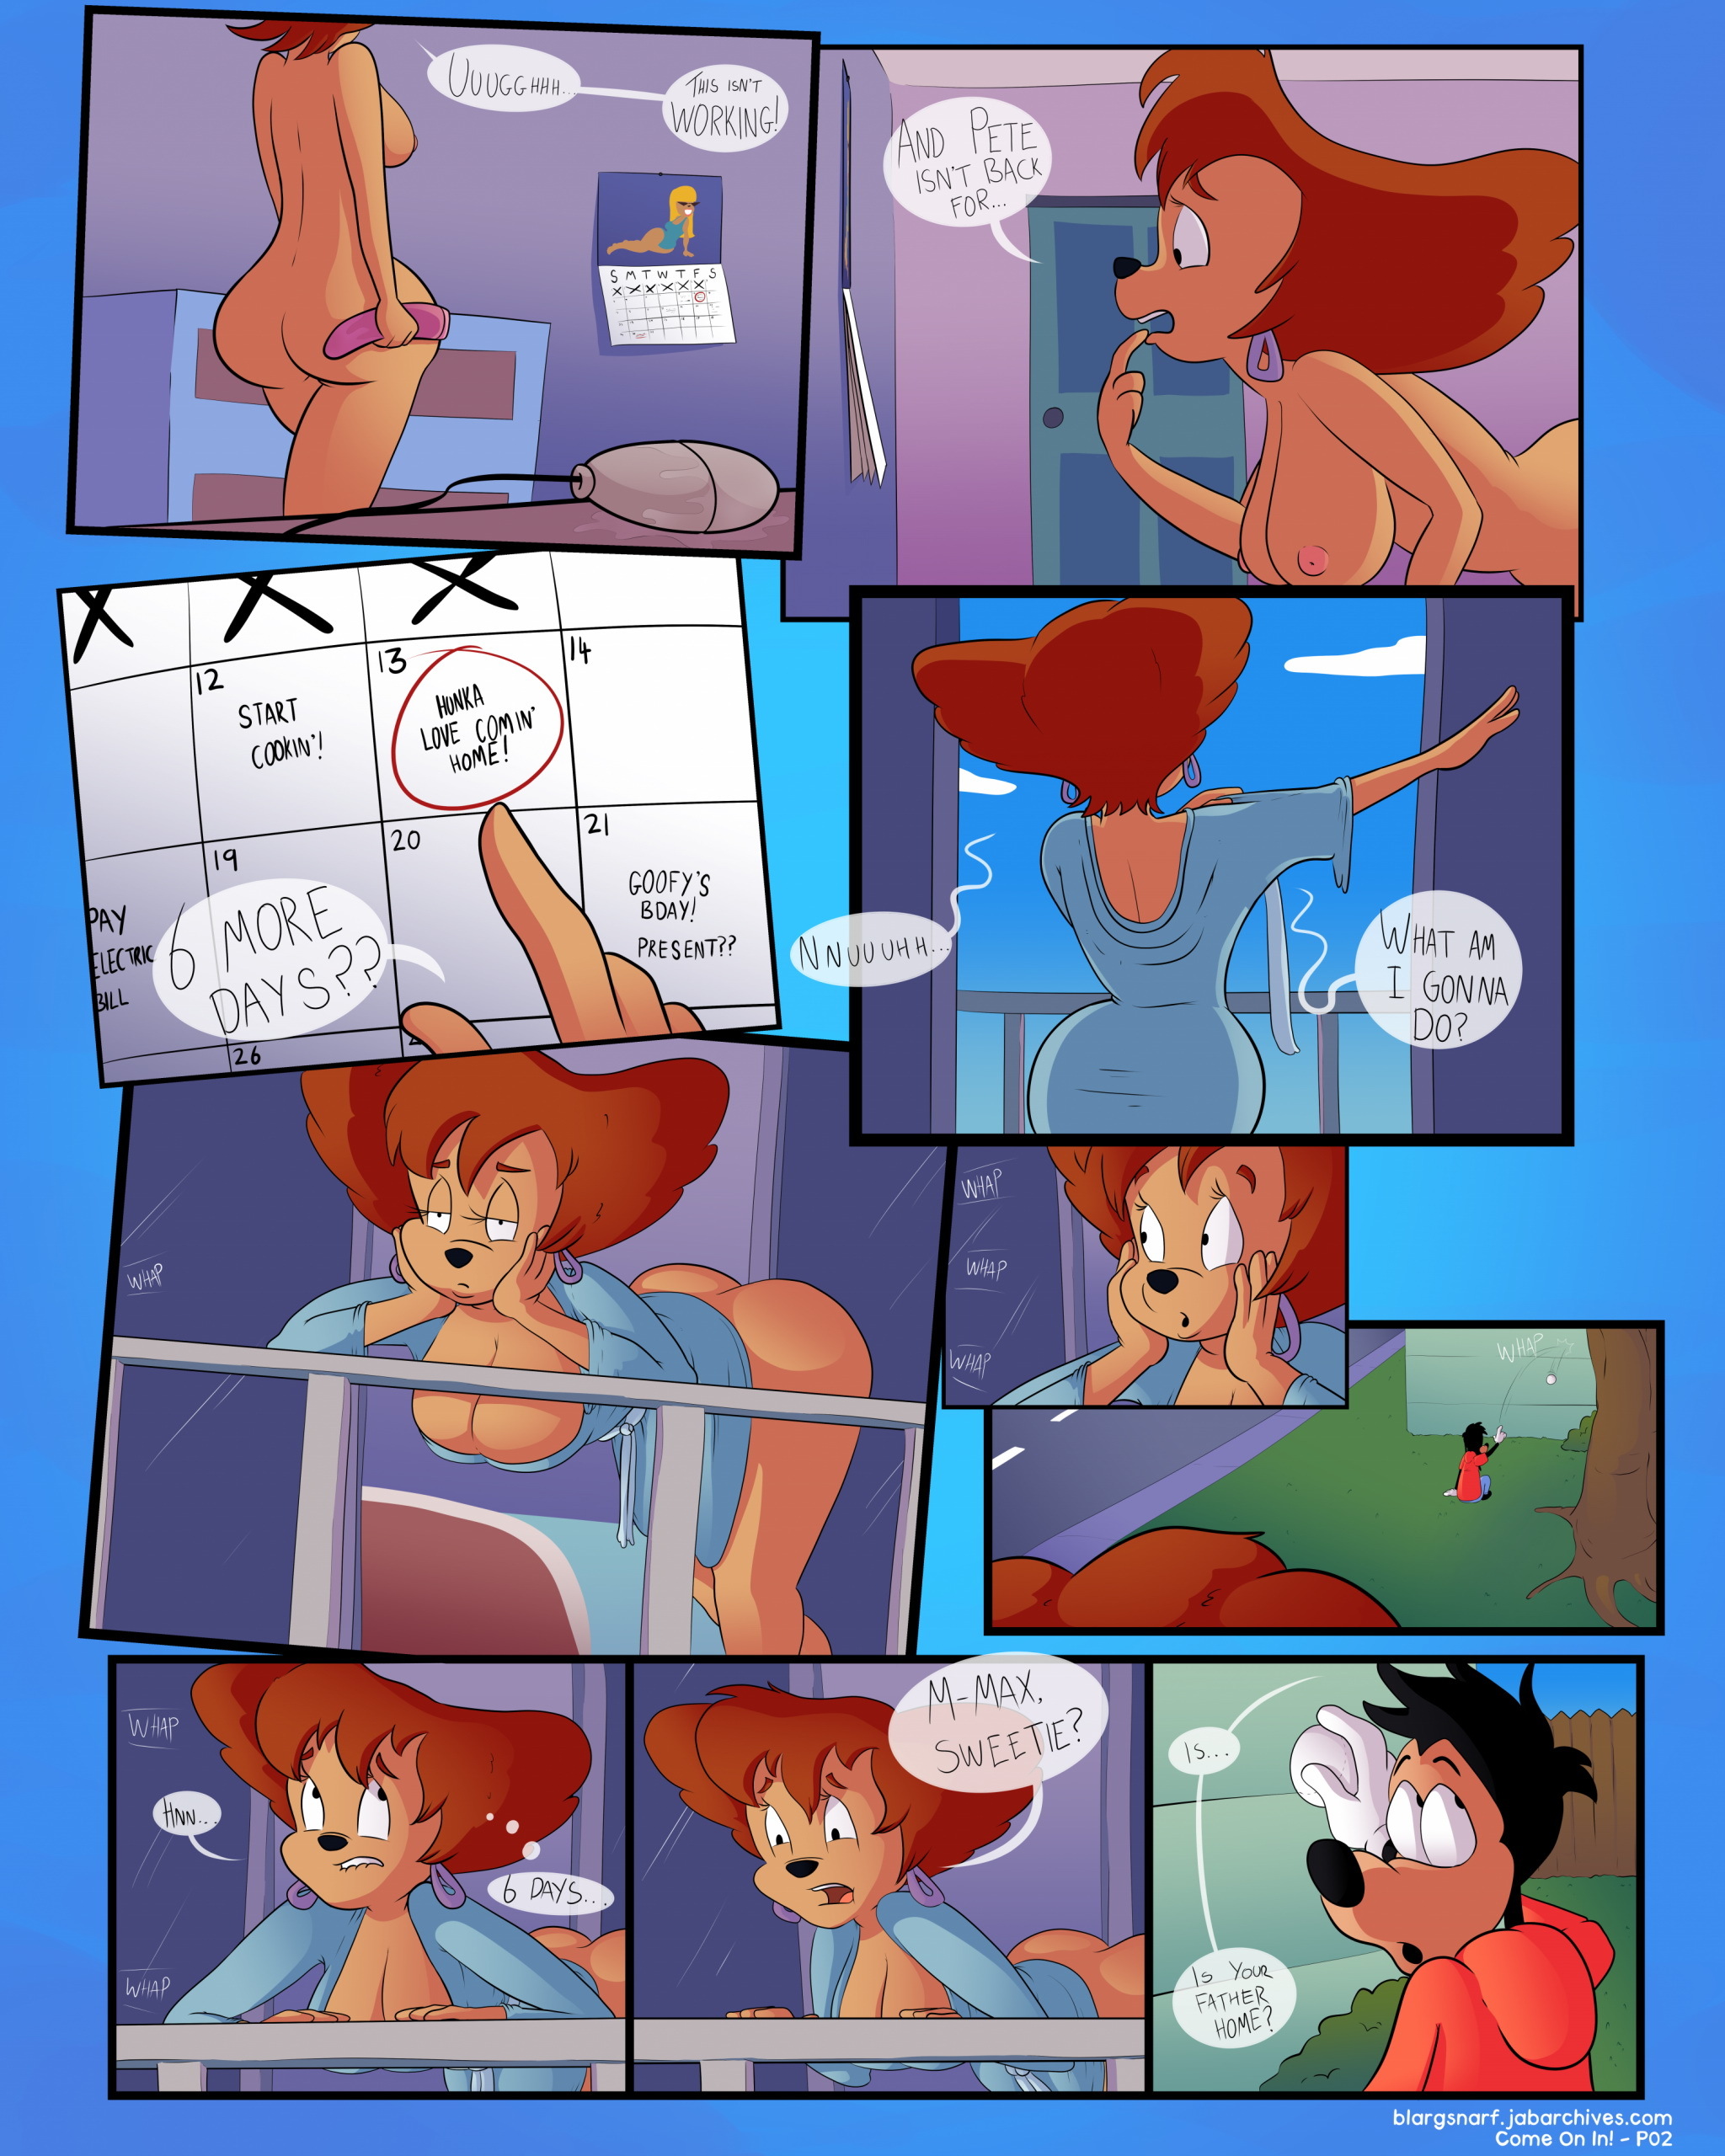 Come On In! - Page 2